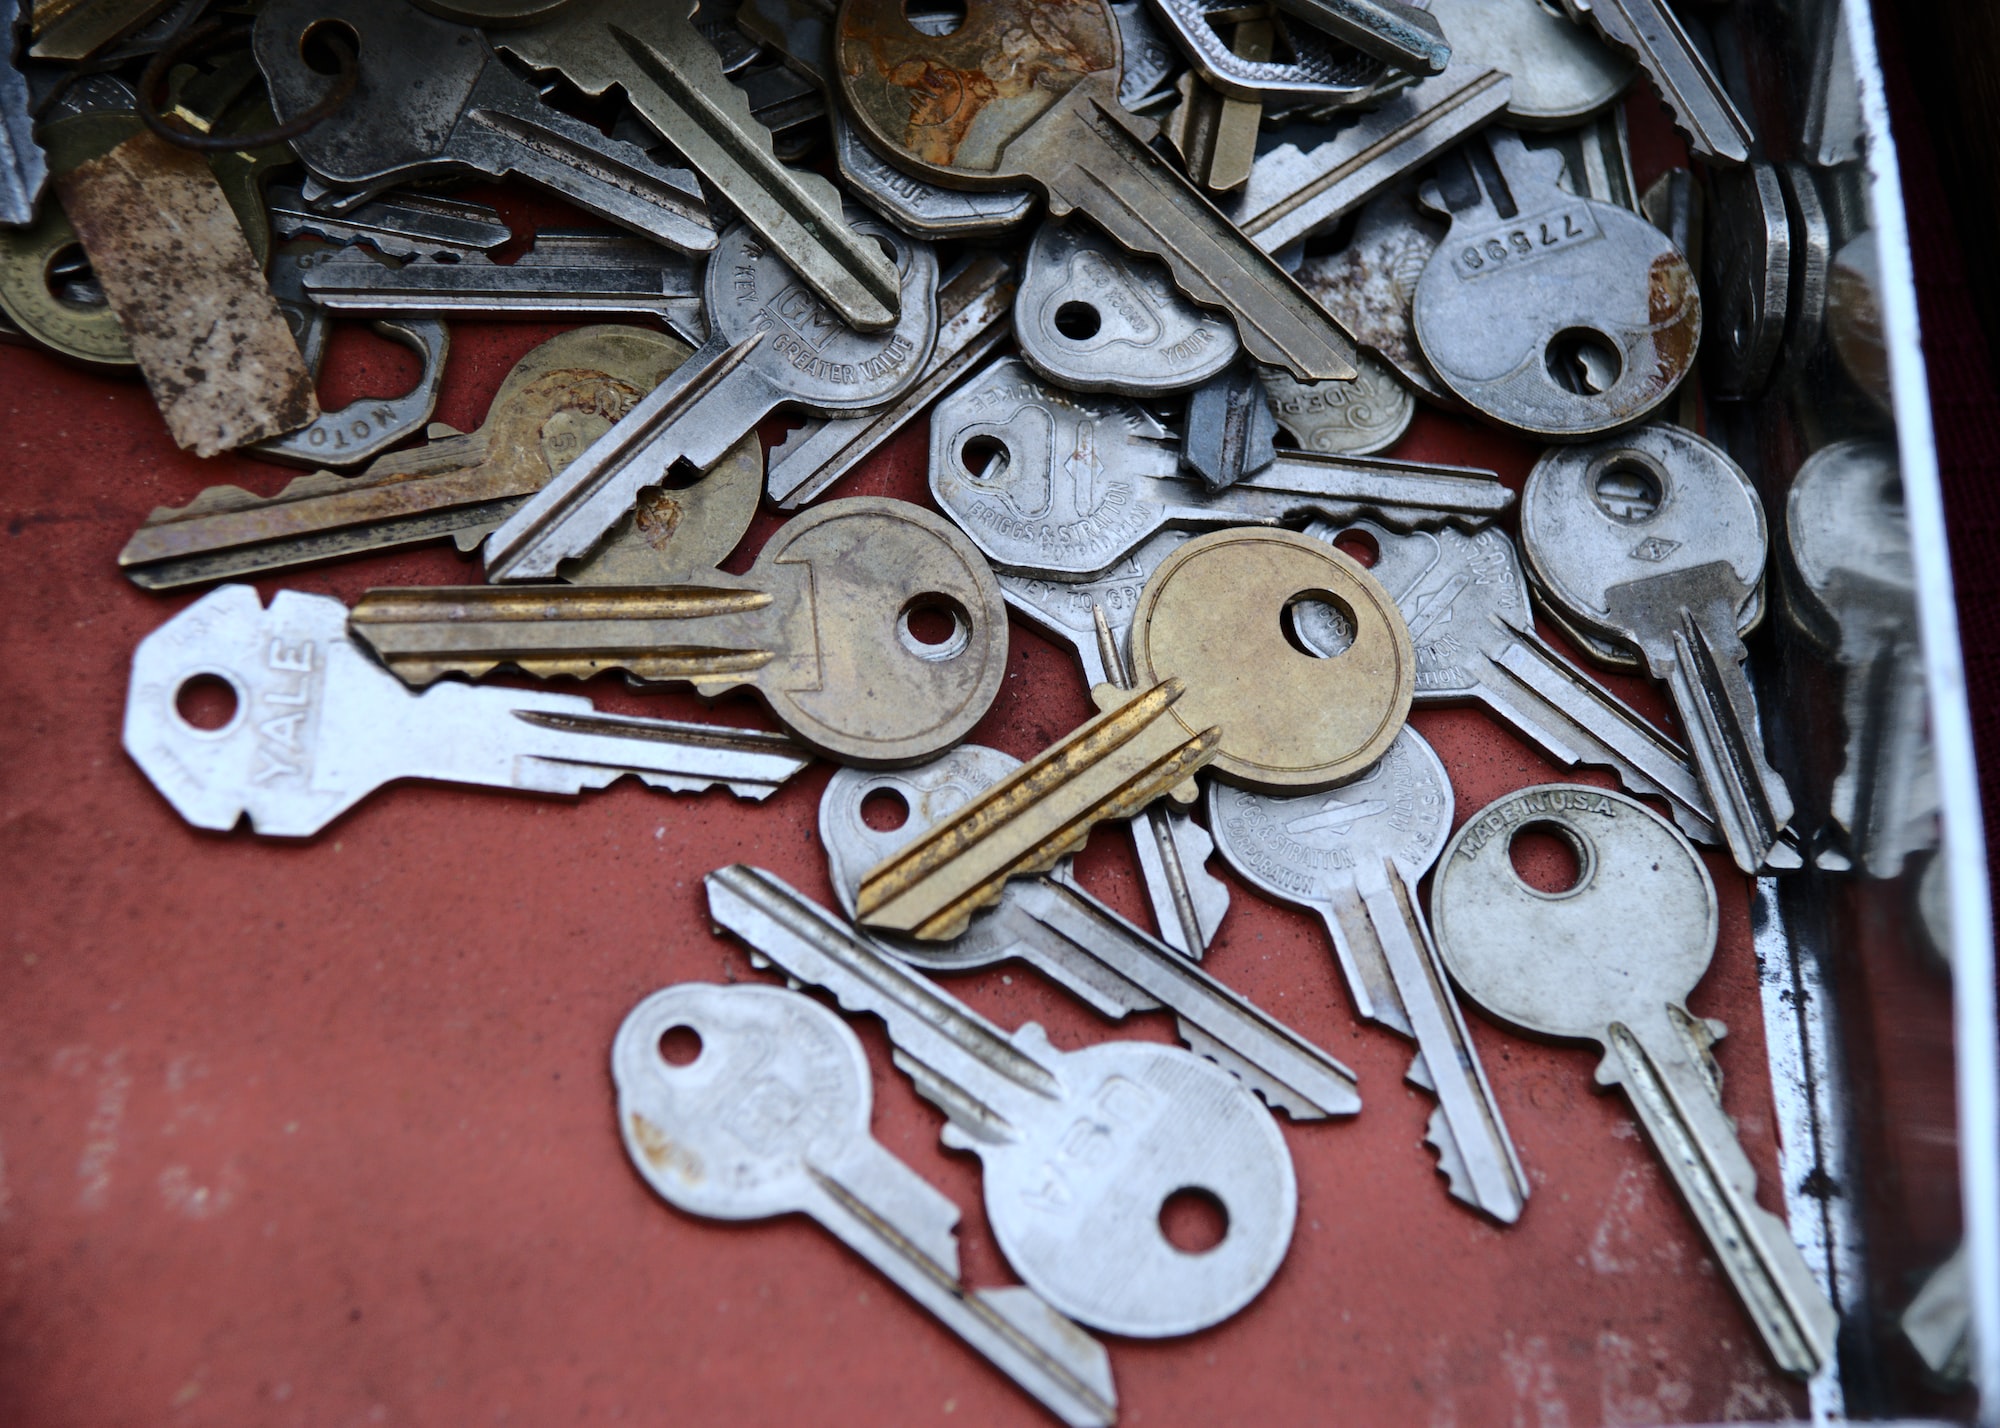 Are you looking for security keys? Read this comparison